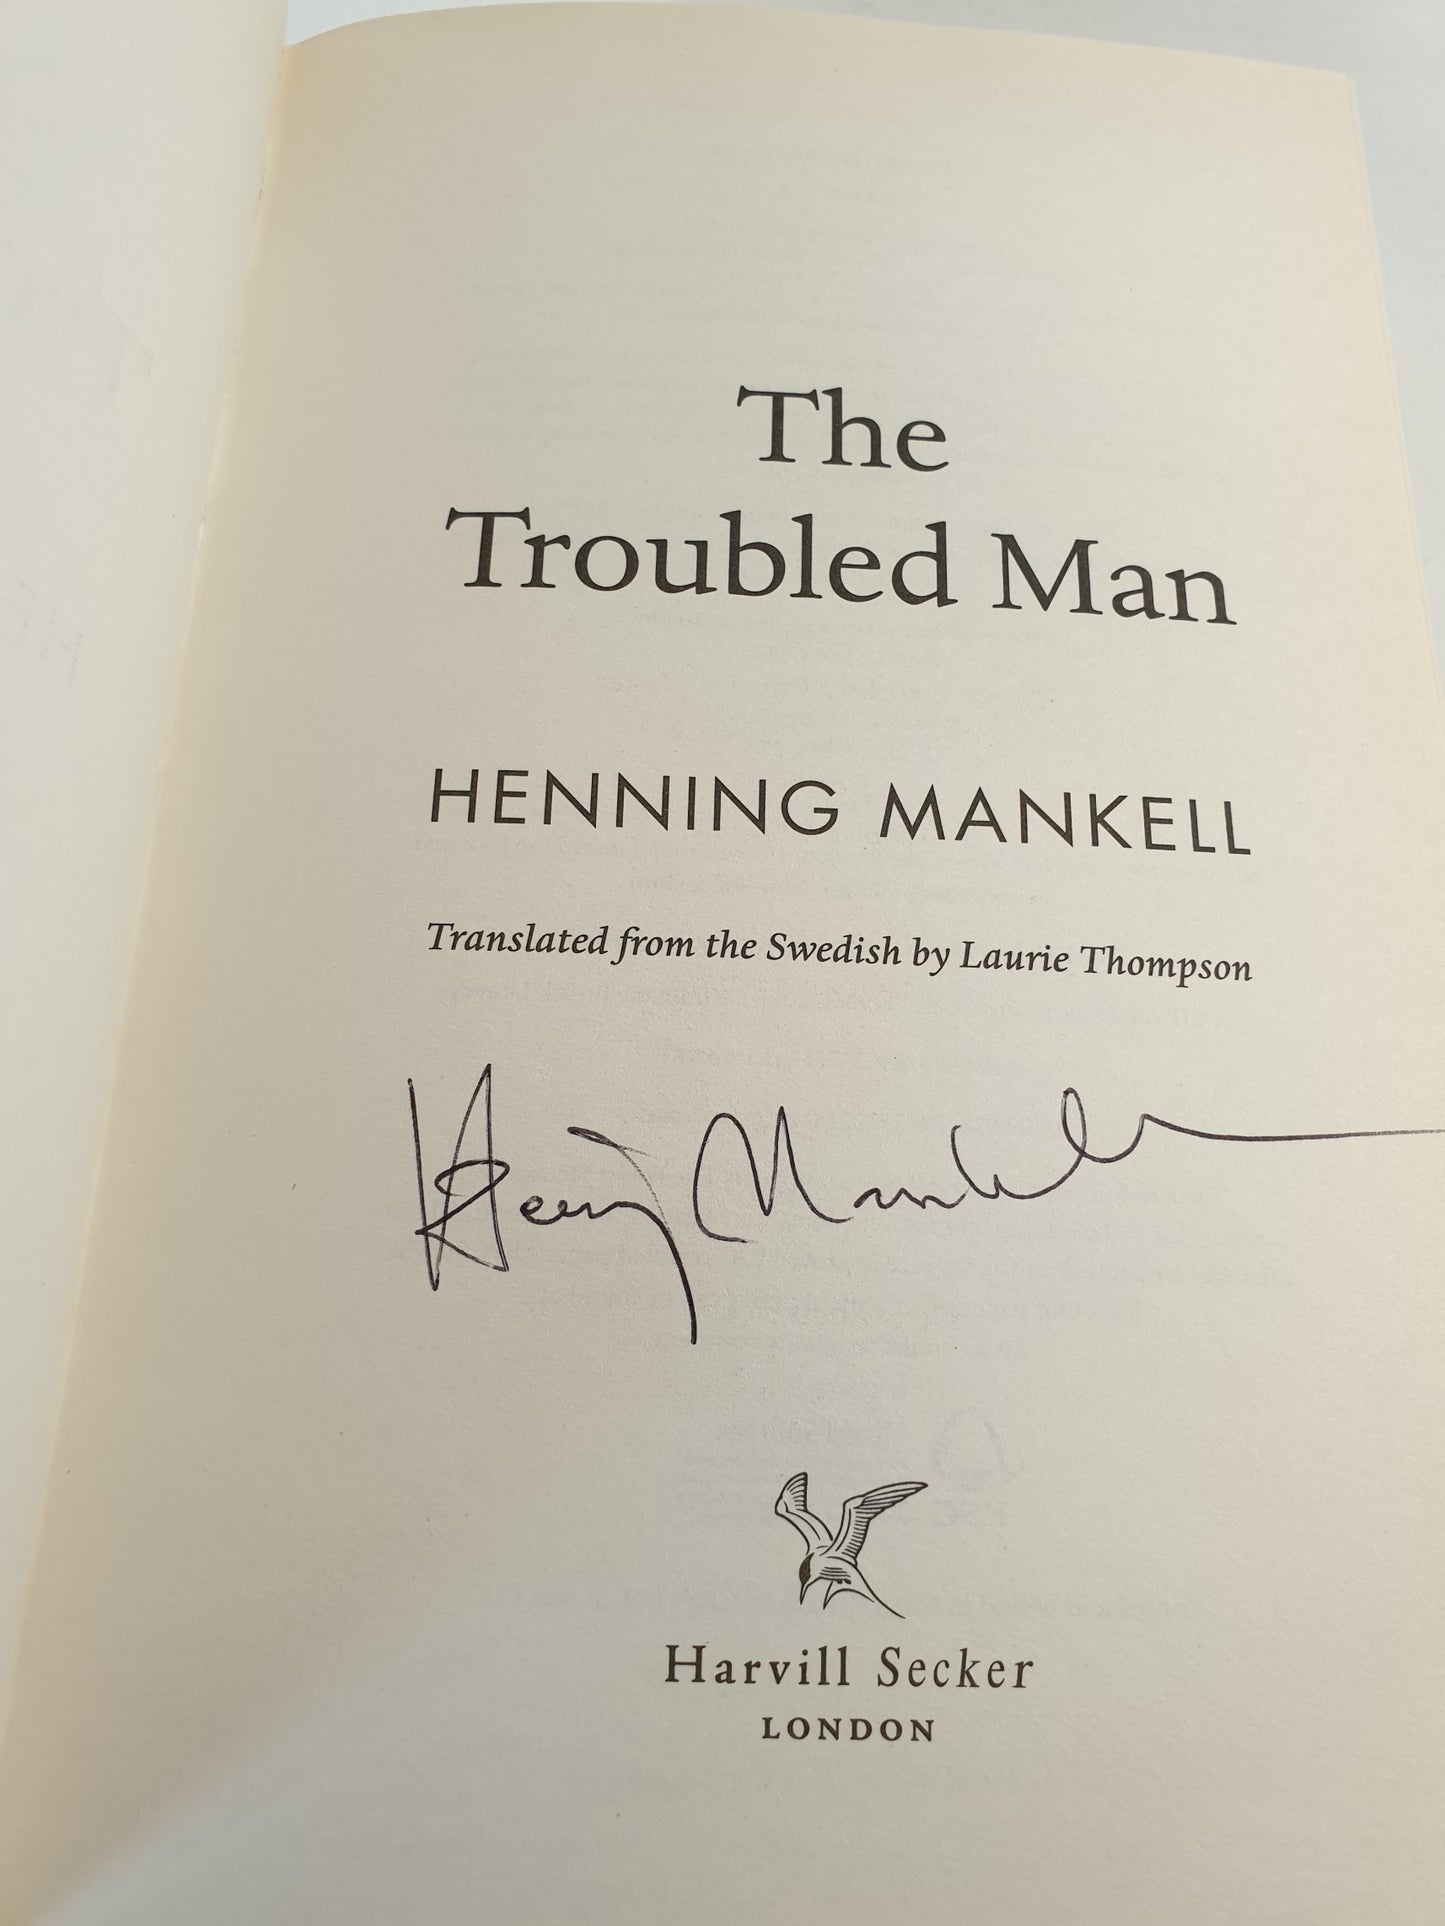 Mankell, Henning - The Troubled Man (Signed)